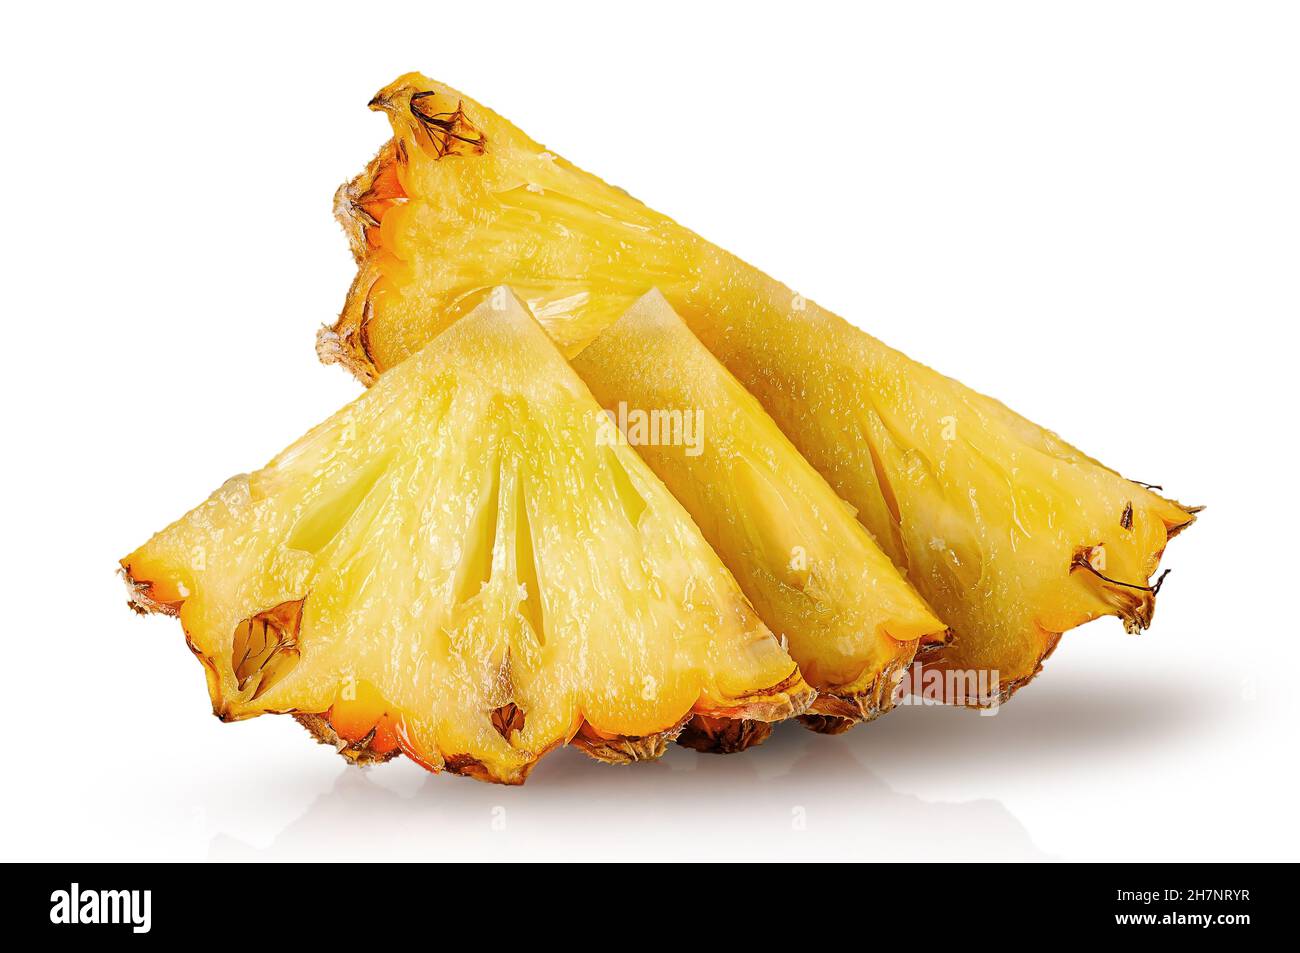 Several slices of pineapple one after another isolated on white background Stock Photo